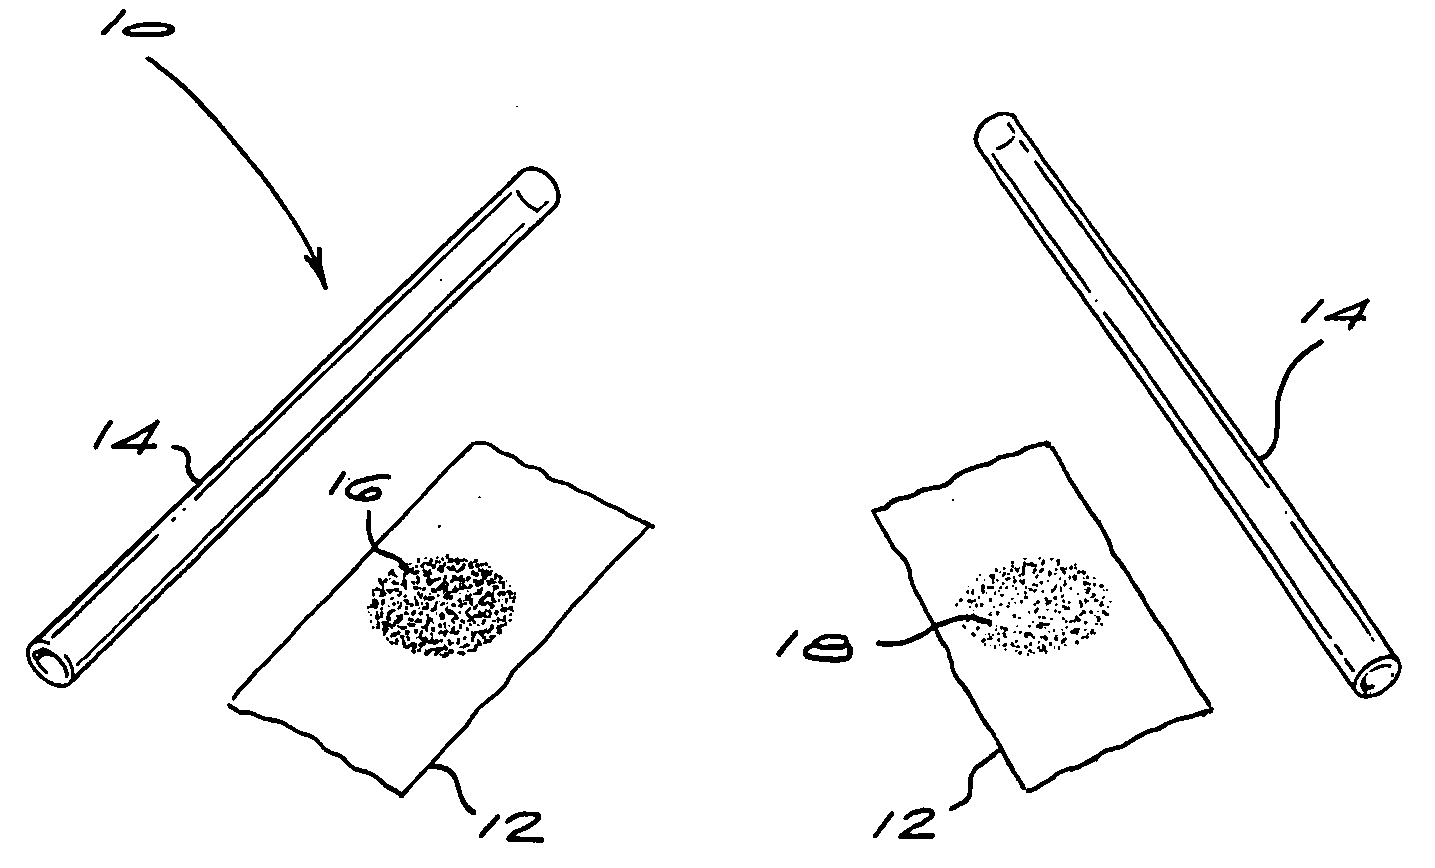 Visual indicating device for bad breath